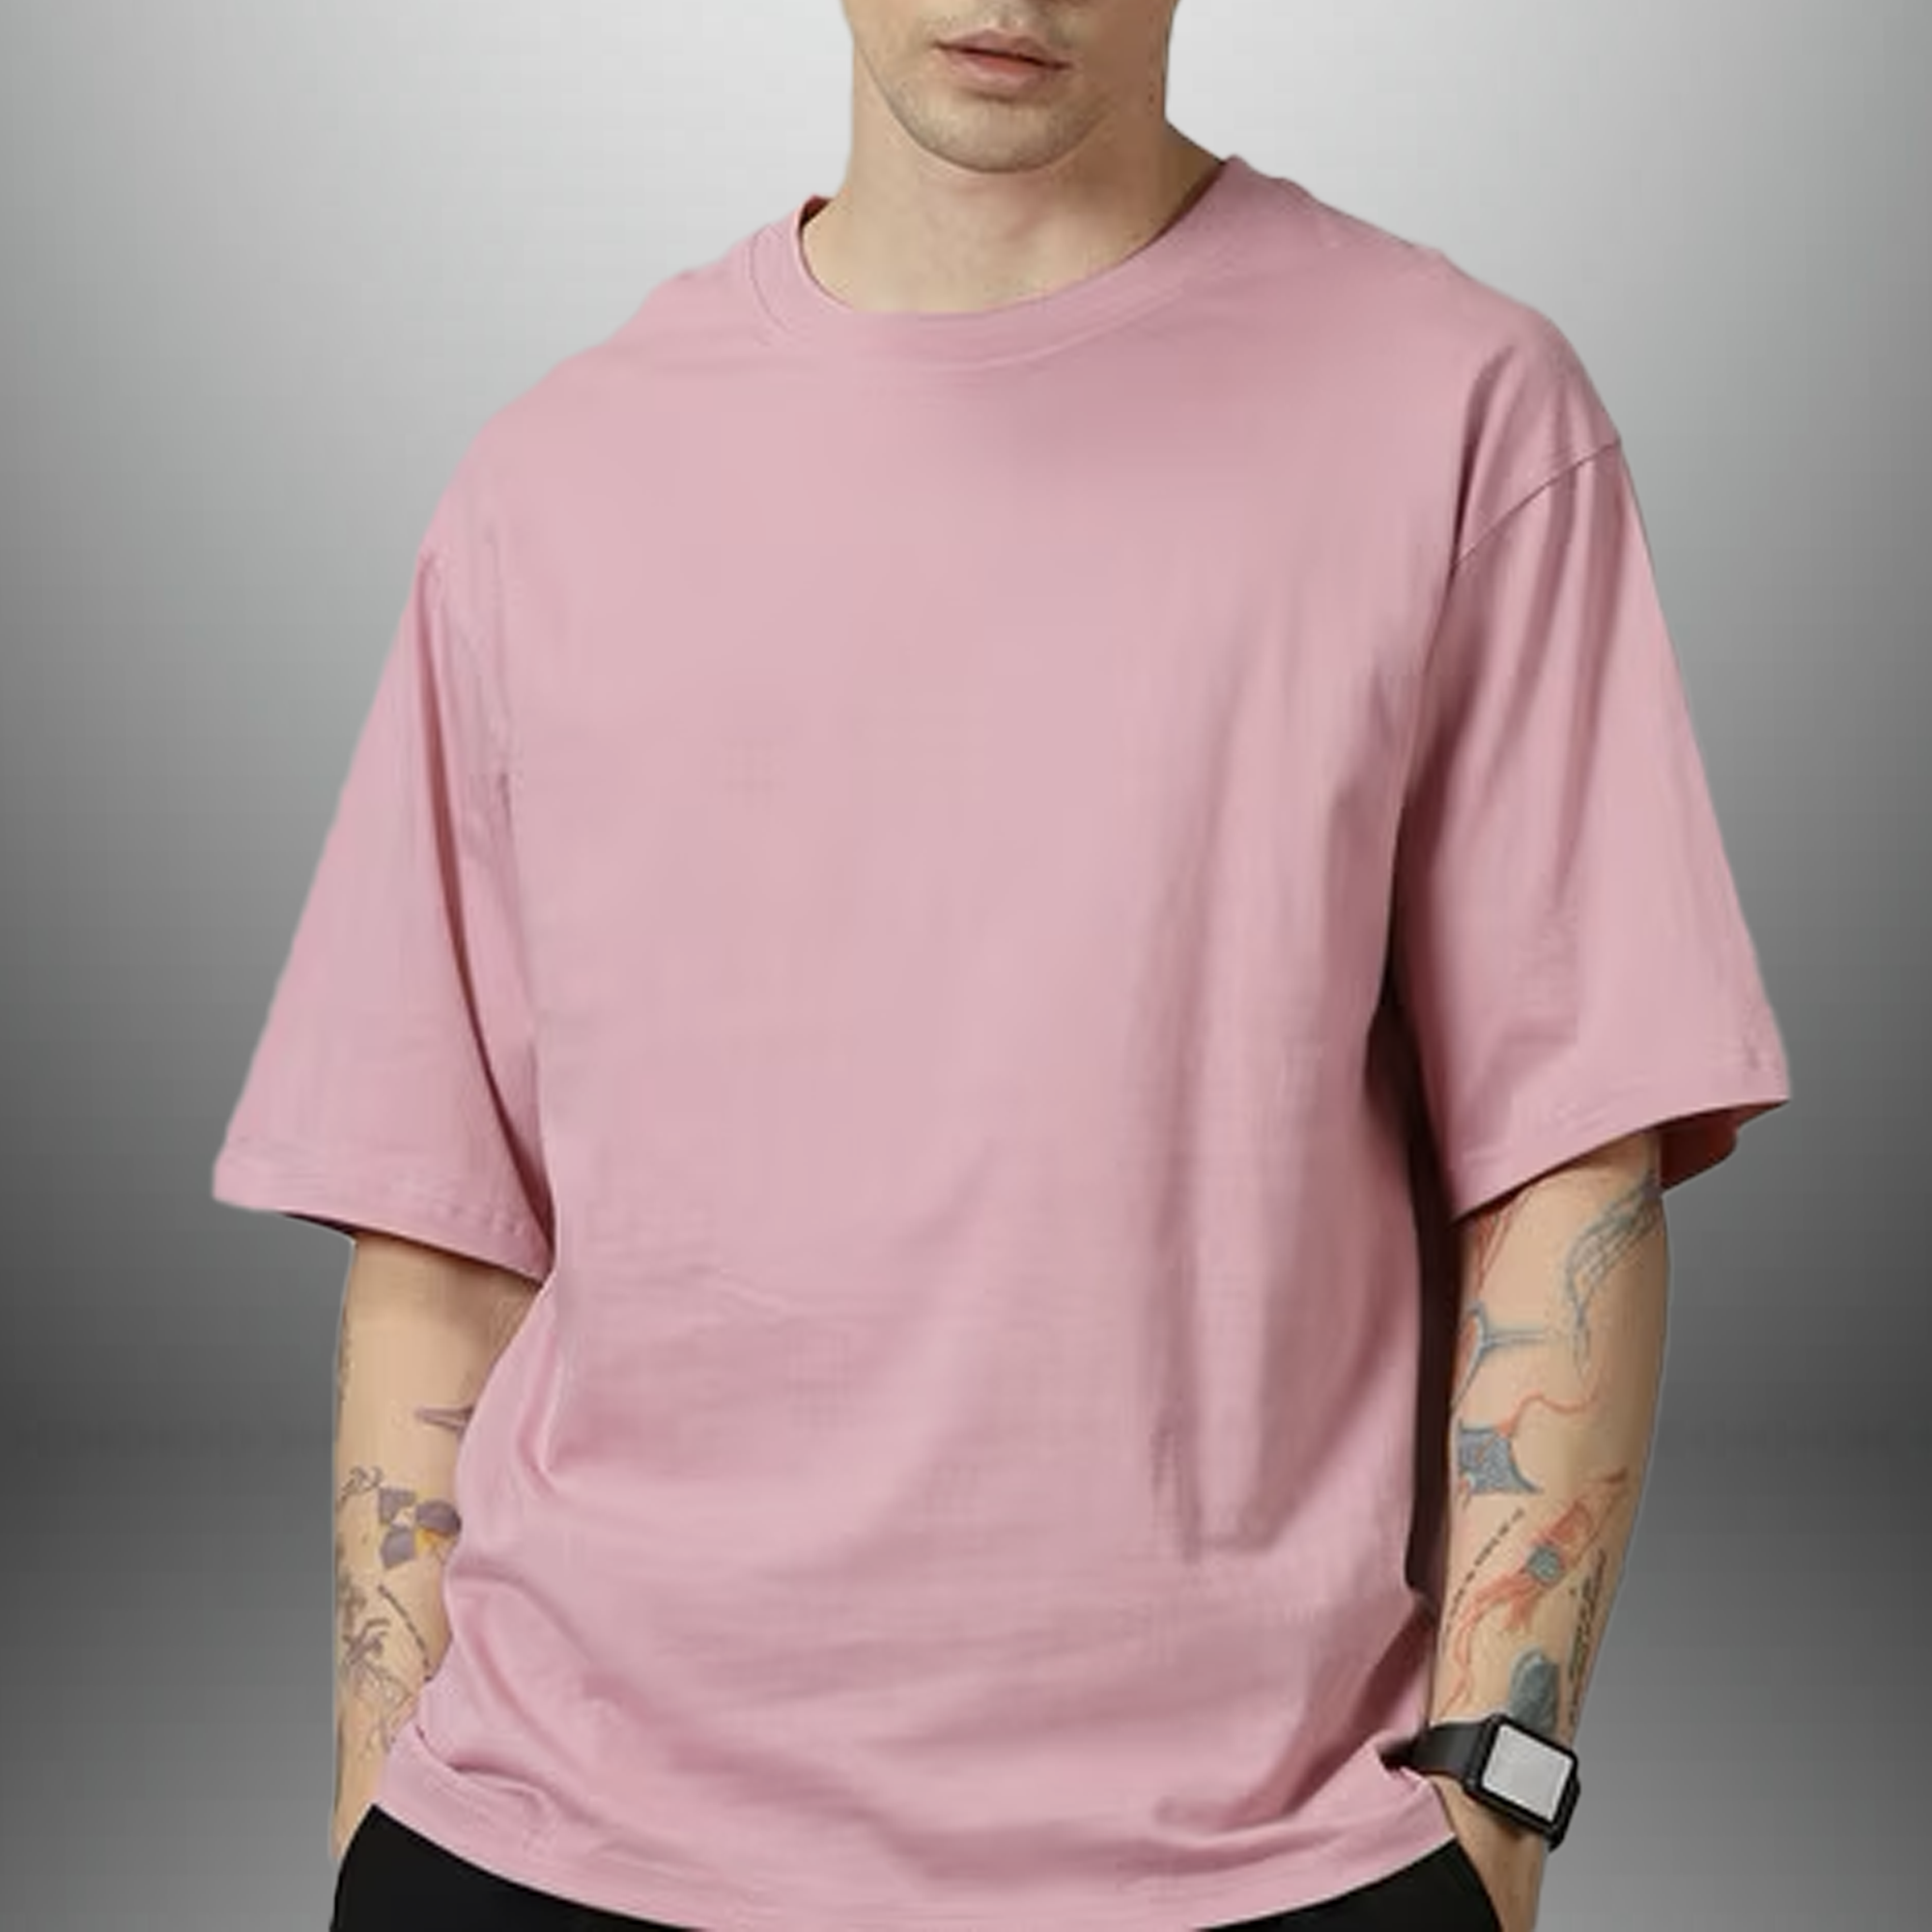 Men'S Pink T-Shirt With Printing On The Back-RKTM002